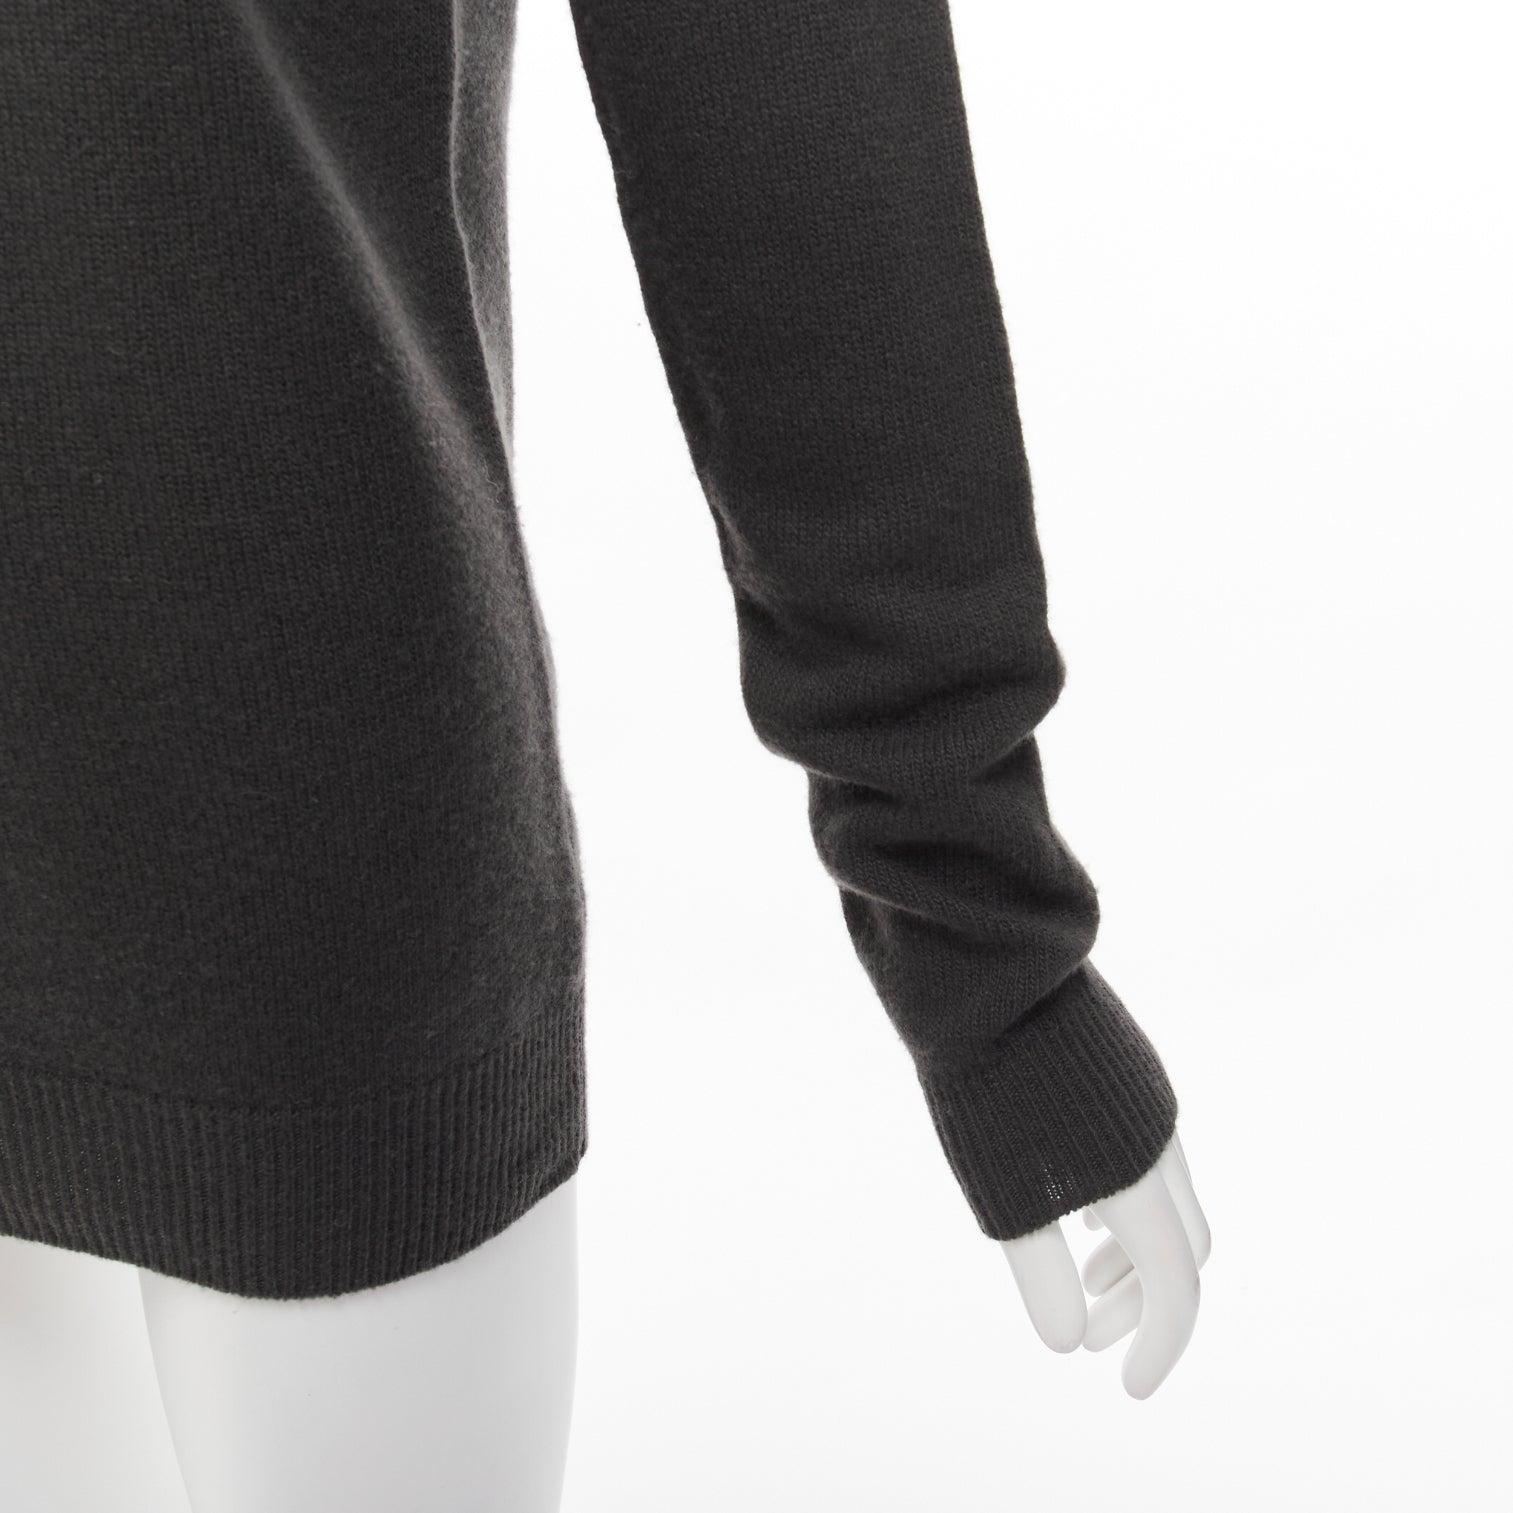 STELLA MCCARTNEY 2010 charcoal virgin wool cashmere raglan sweater IT38 XS
Reference: NKLL/A00155
Brand: Stella McCartney
Designer: Stella McCartney
Collection: 2010
Material: Virgin Wool, Cashmere
Color: Grey
Pattern: Solid
Closure: Pullover
Made